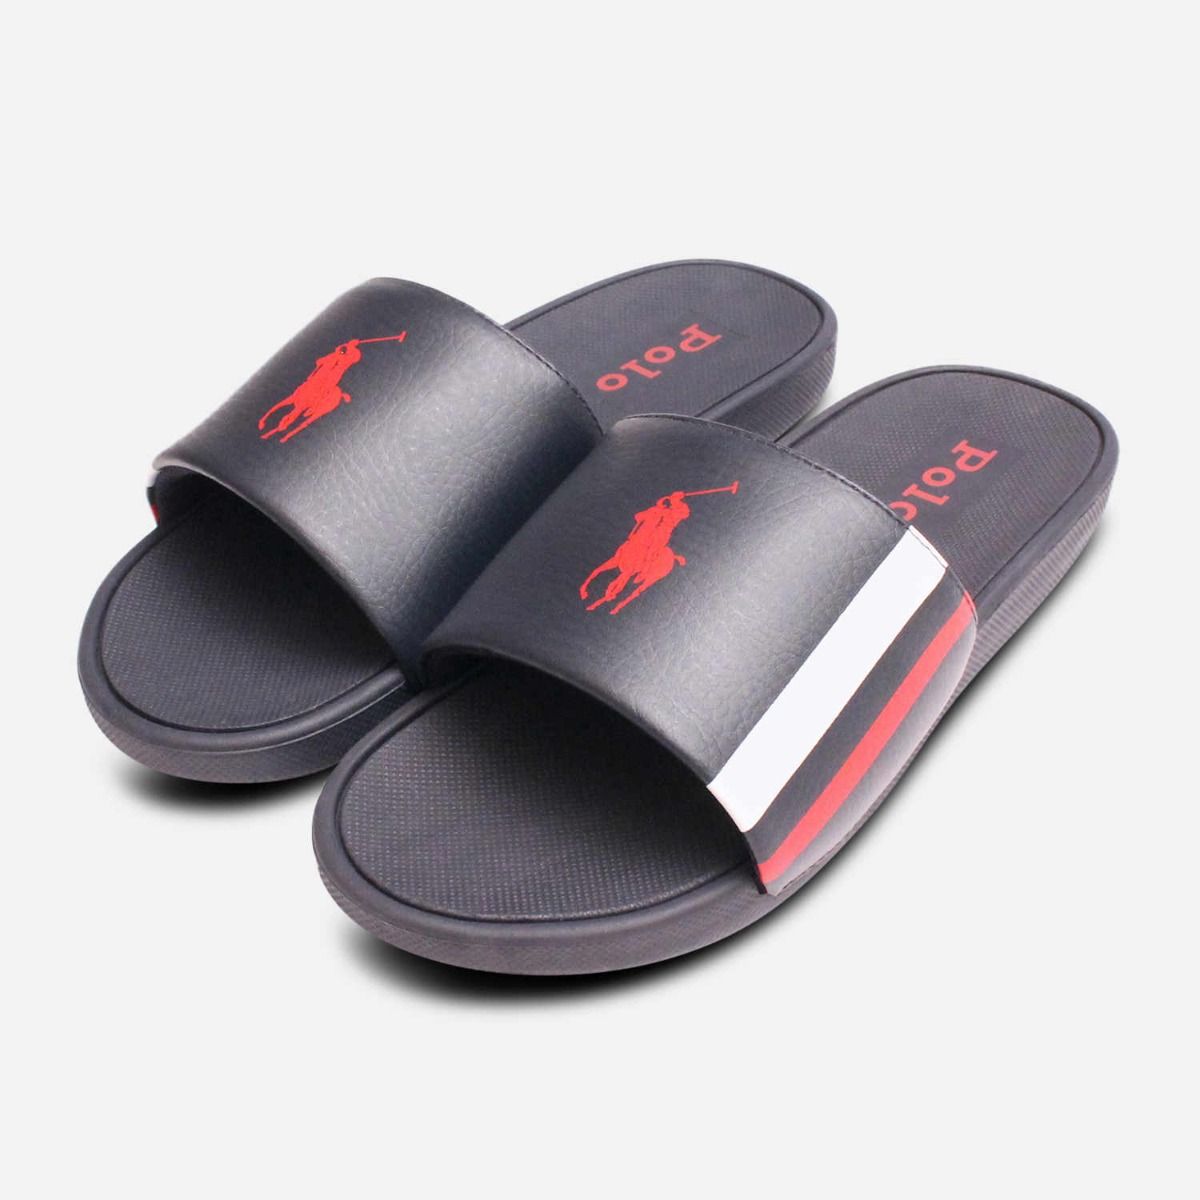 polo sandals for boys